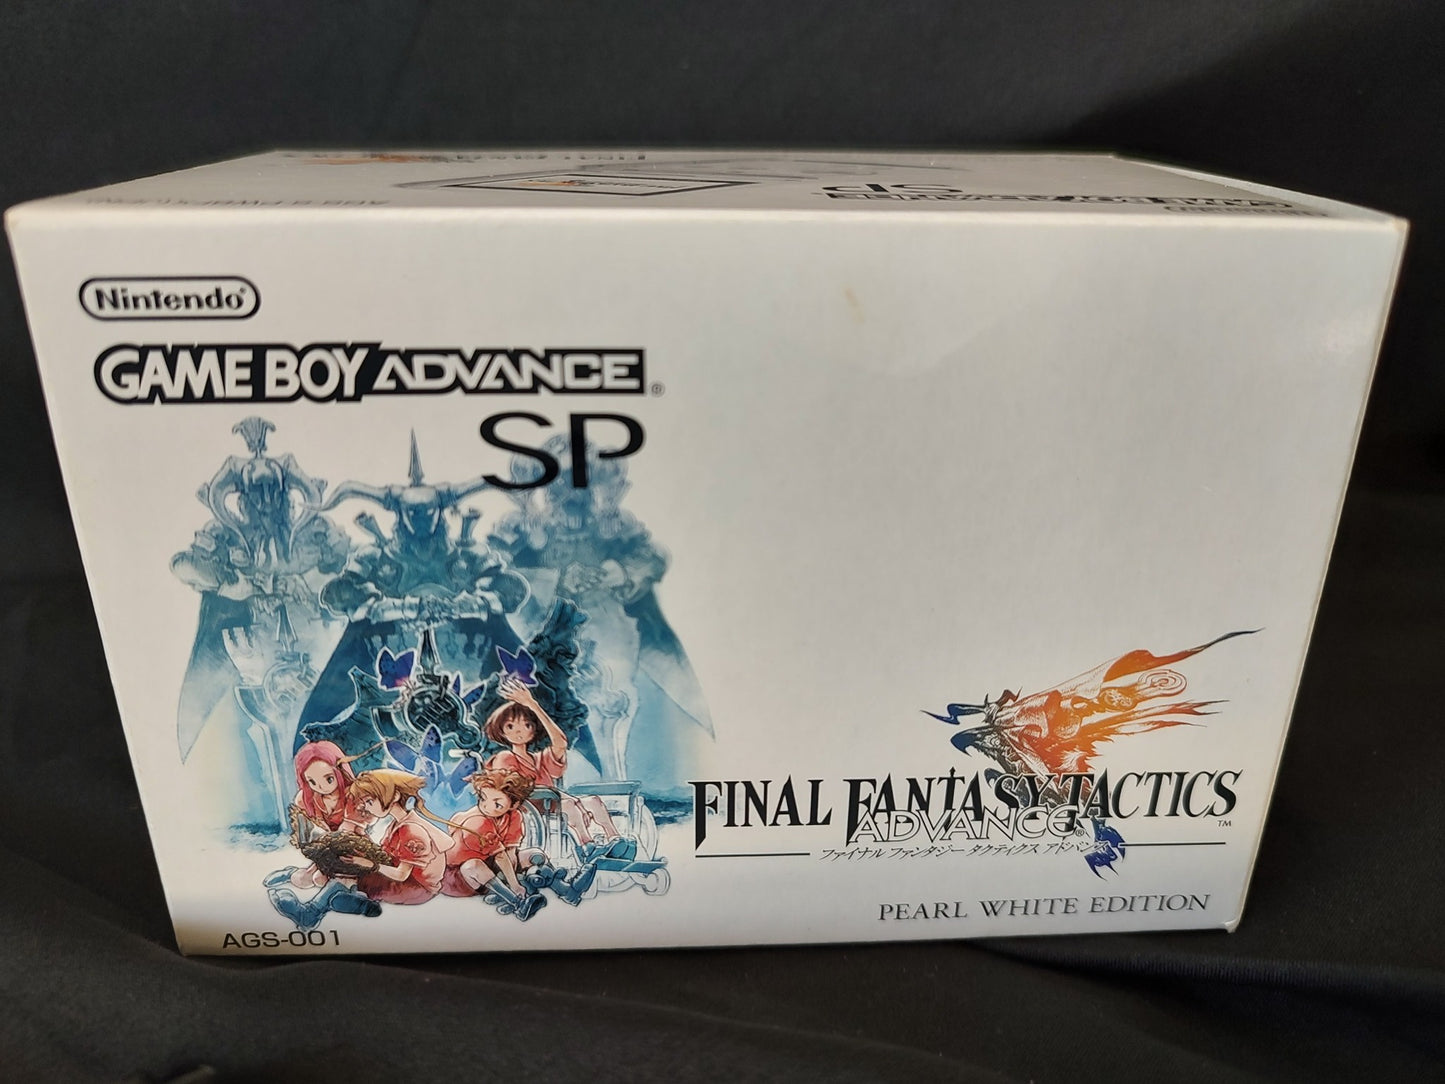 Final Fantasy Tactics LIMITED GAMEBOY ADVANCE SP CONSOLE GBA Boxed set-e1227